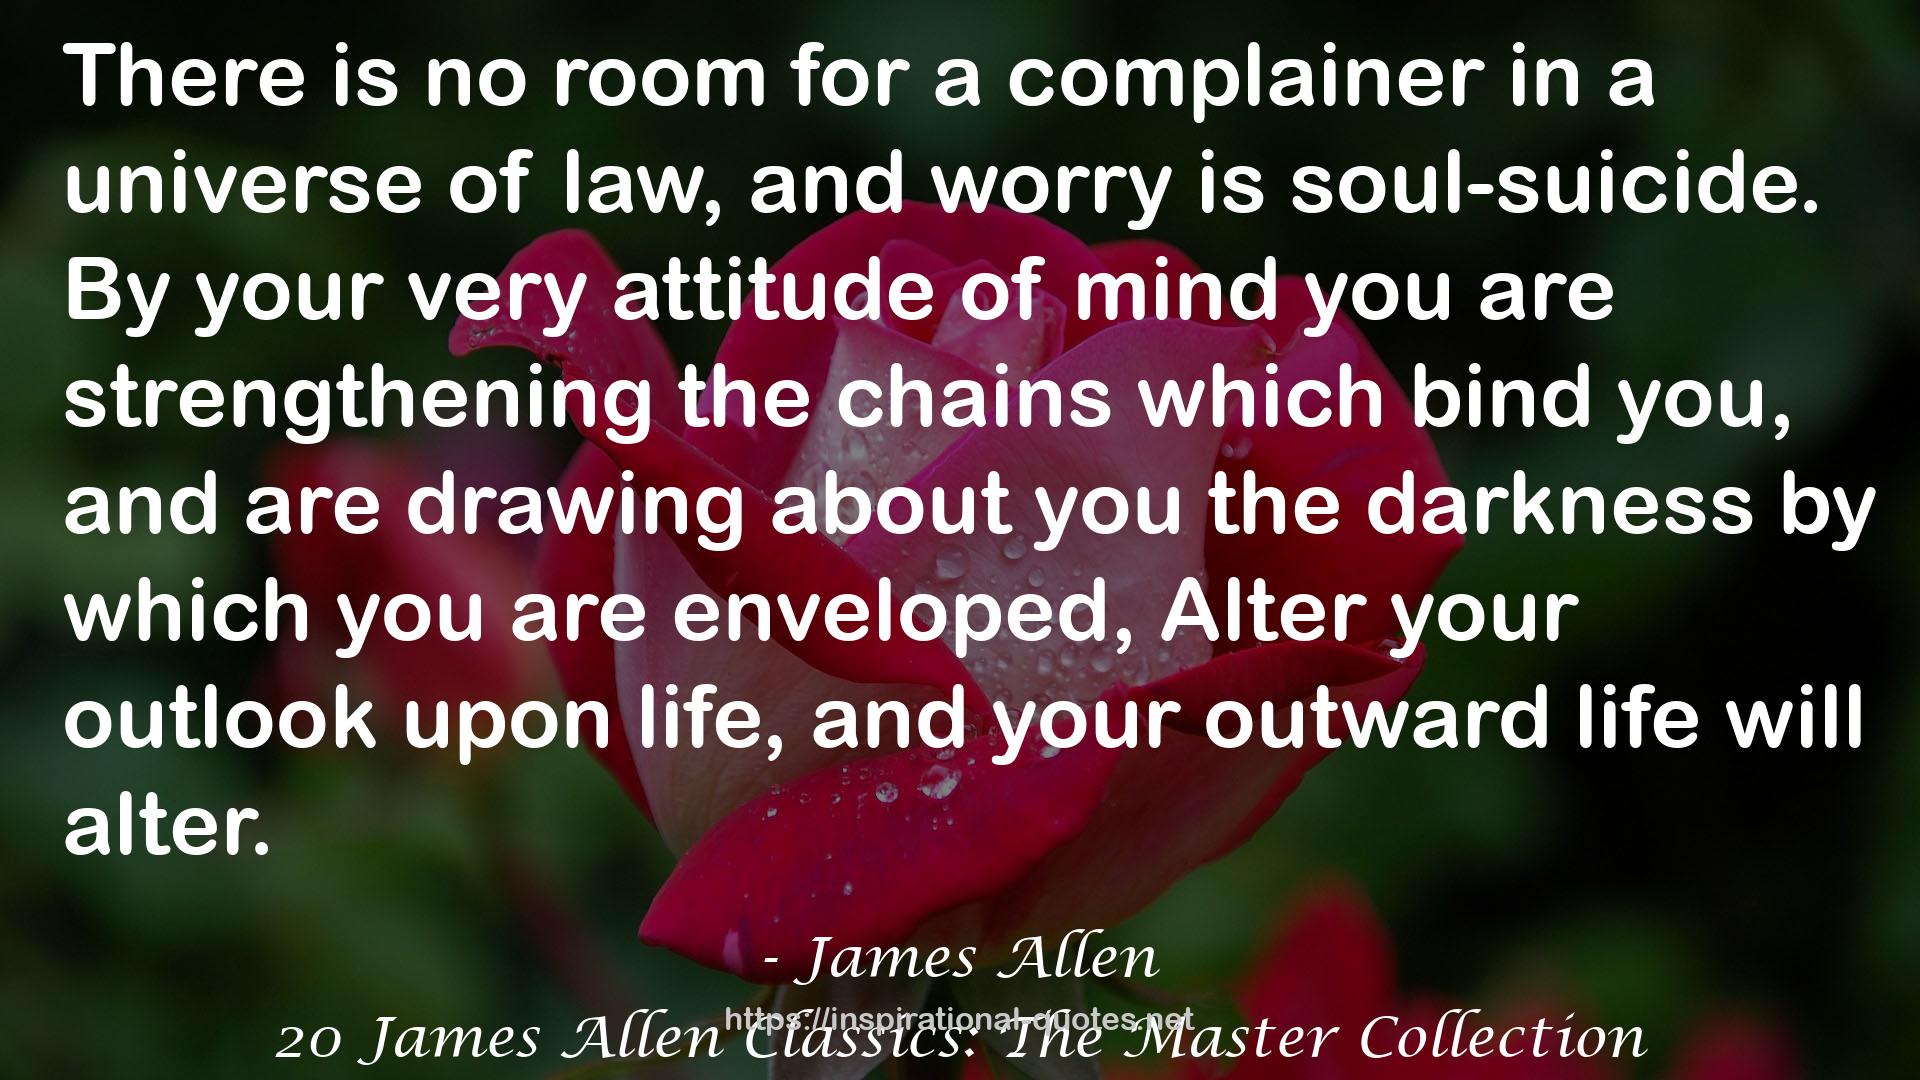 20 James Allen Classics: The Master Collection QUOTES